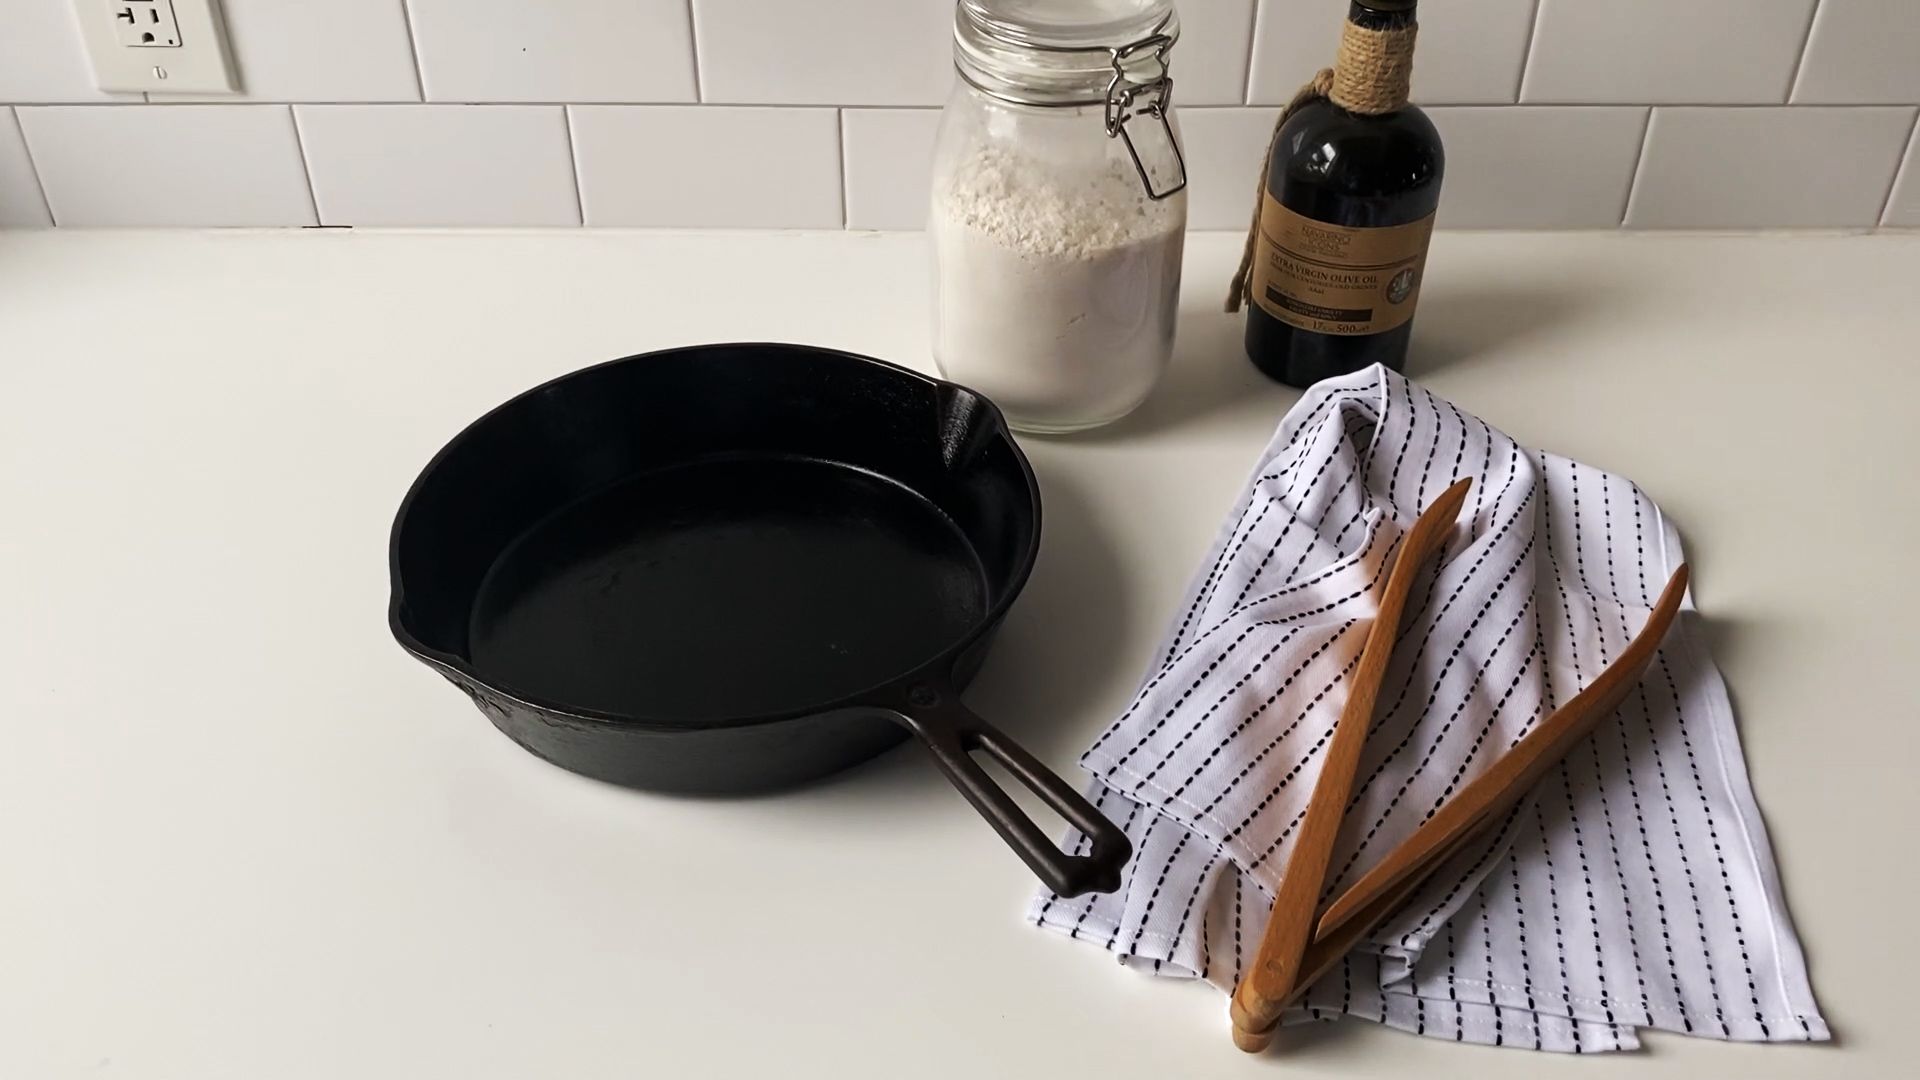 seasoning #cast #iron #pans #tips #seasoningcastironpanstips  Cleaning  cast iron pans, Cast iron cleaning, Cleaning recipes